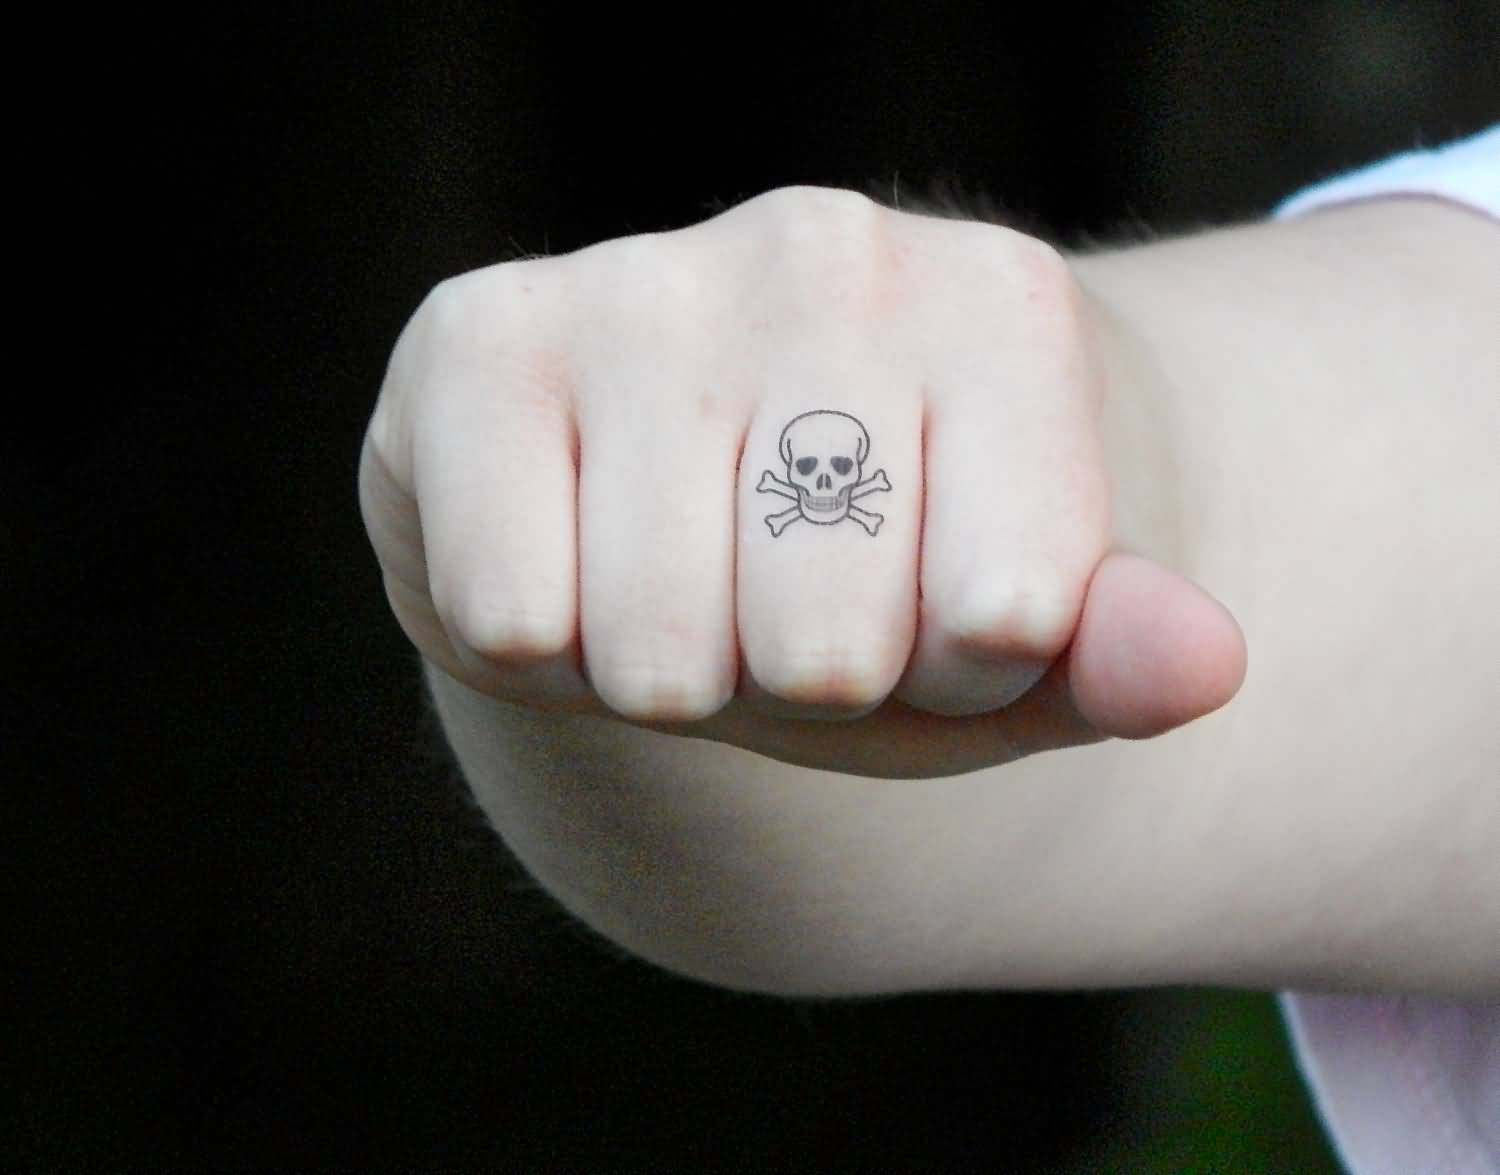 Cool Black Outline Pirate Skull With Crossbone Tattoo On Right Hand Finger